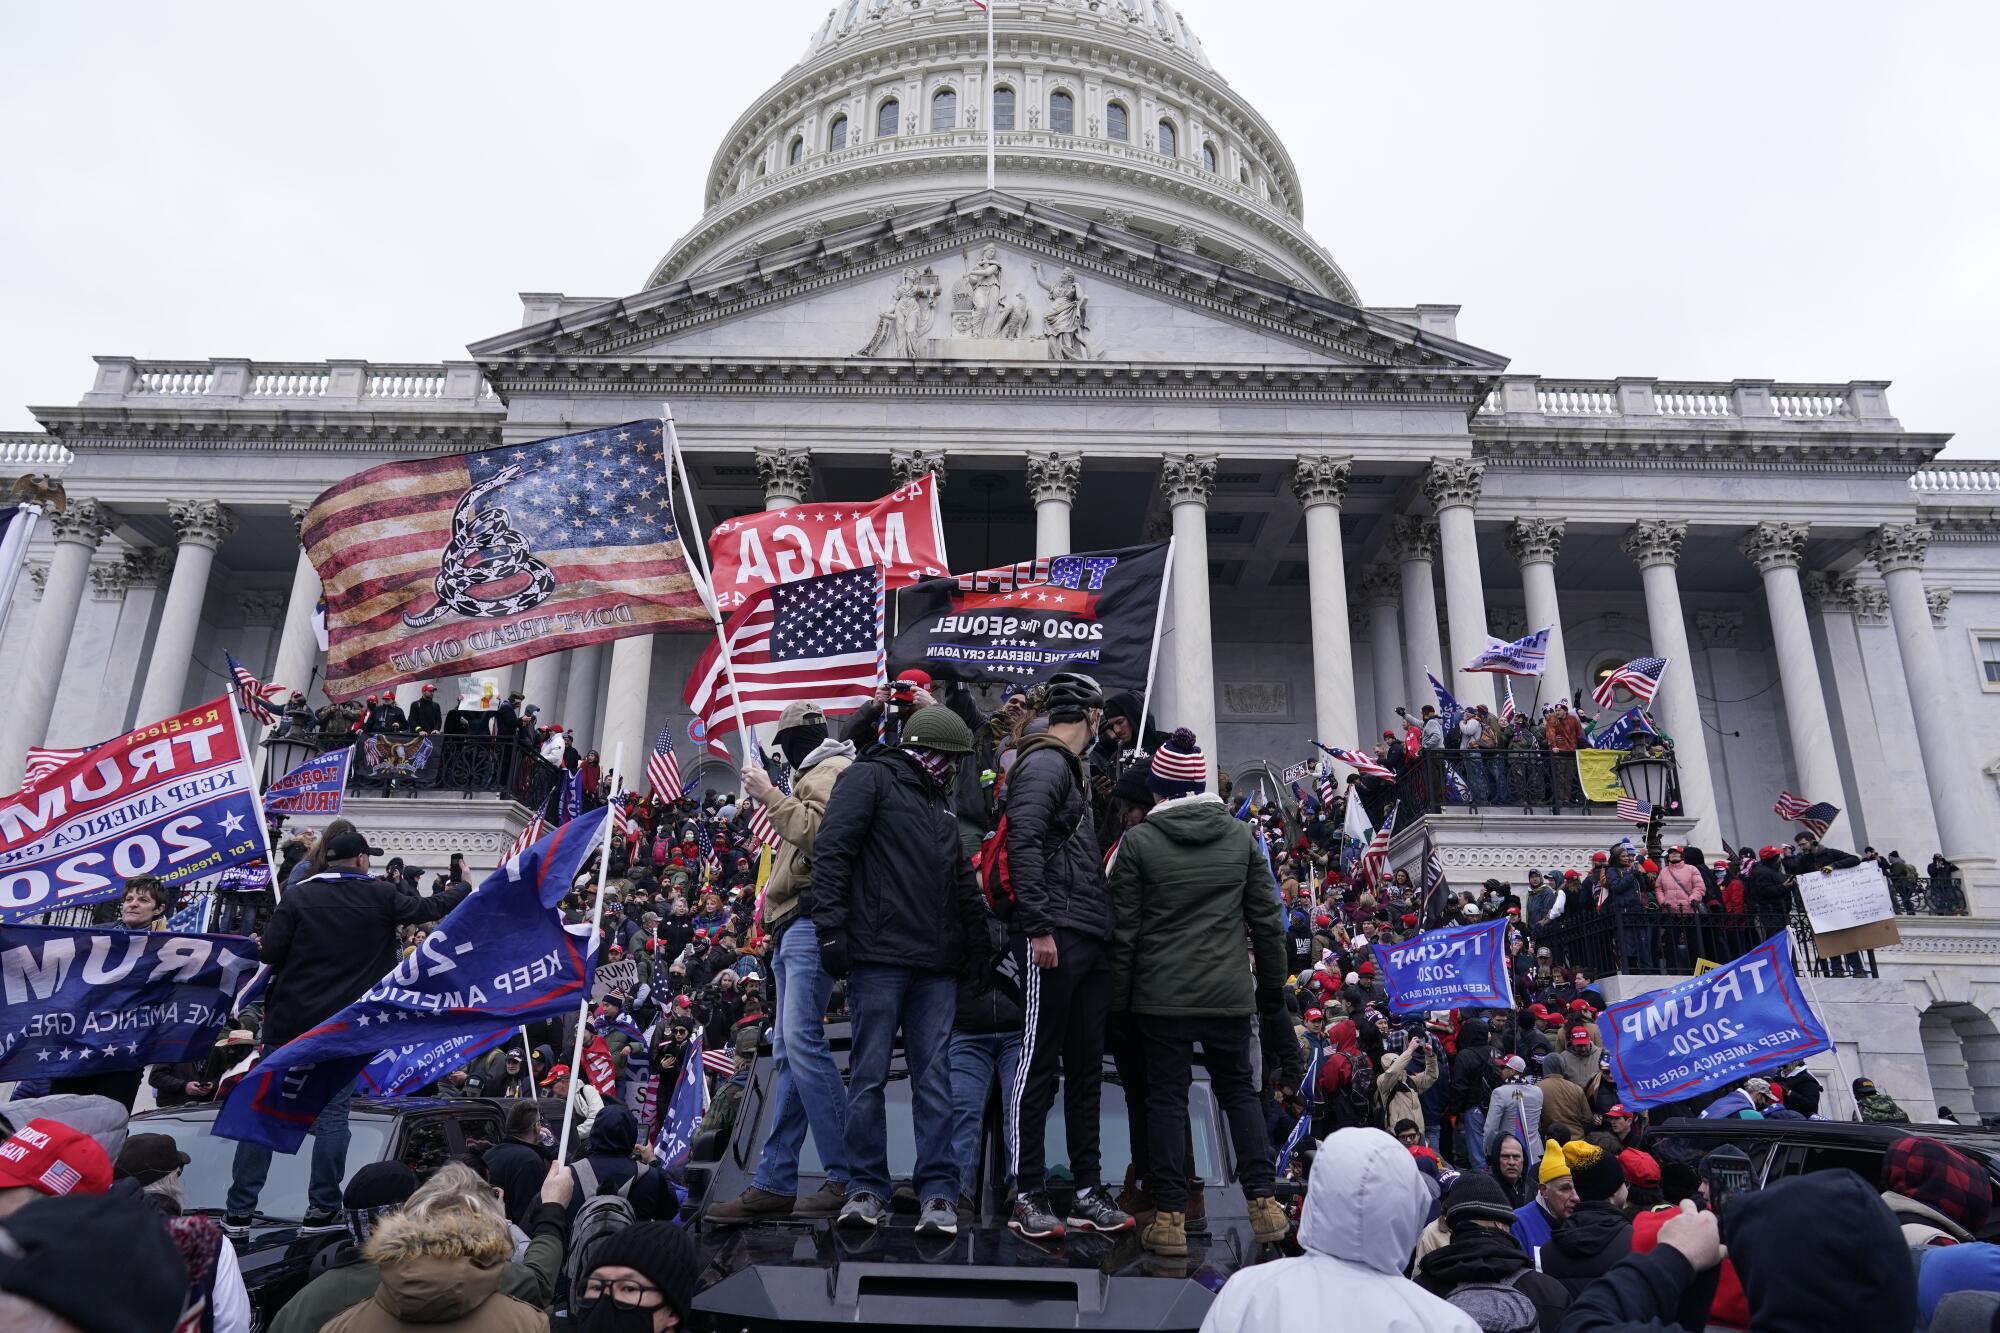 Trump supporters stand on a U.S. Capitol Police armored vehicle as others take over the steps of the Capitol.